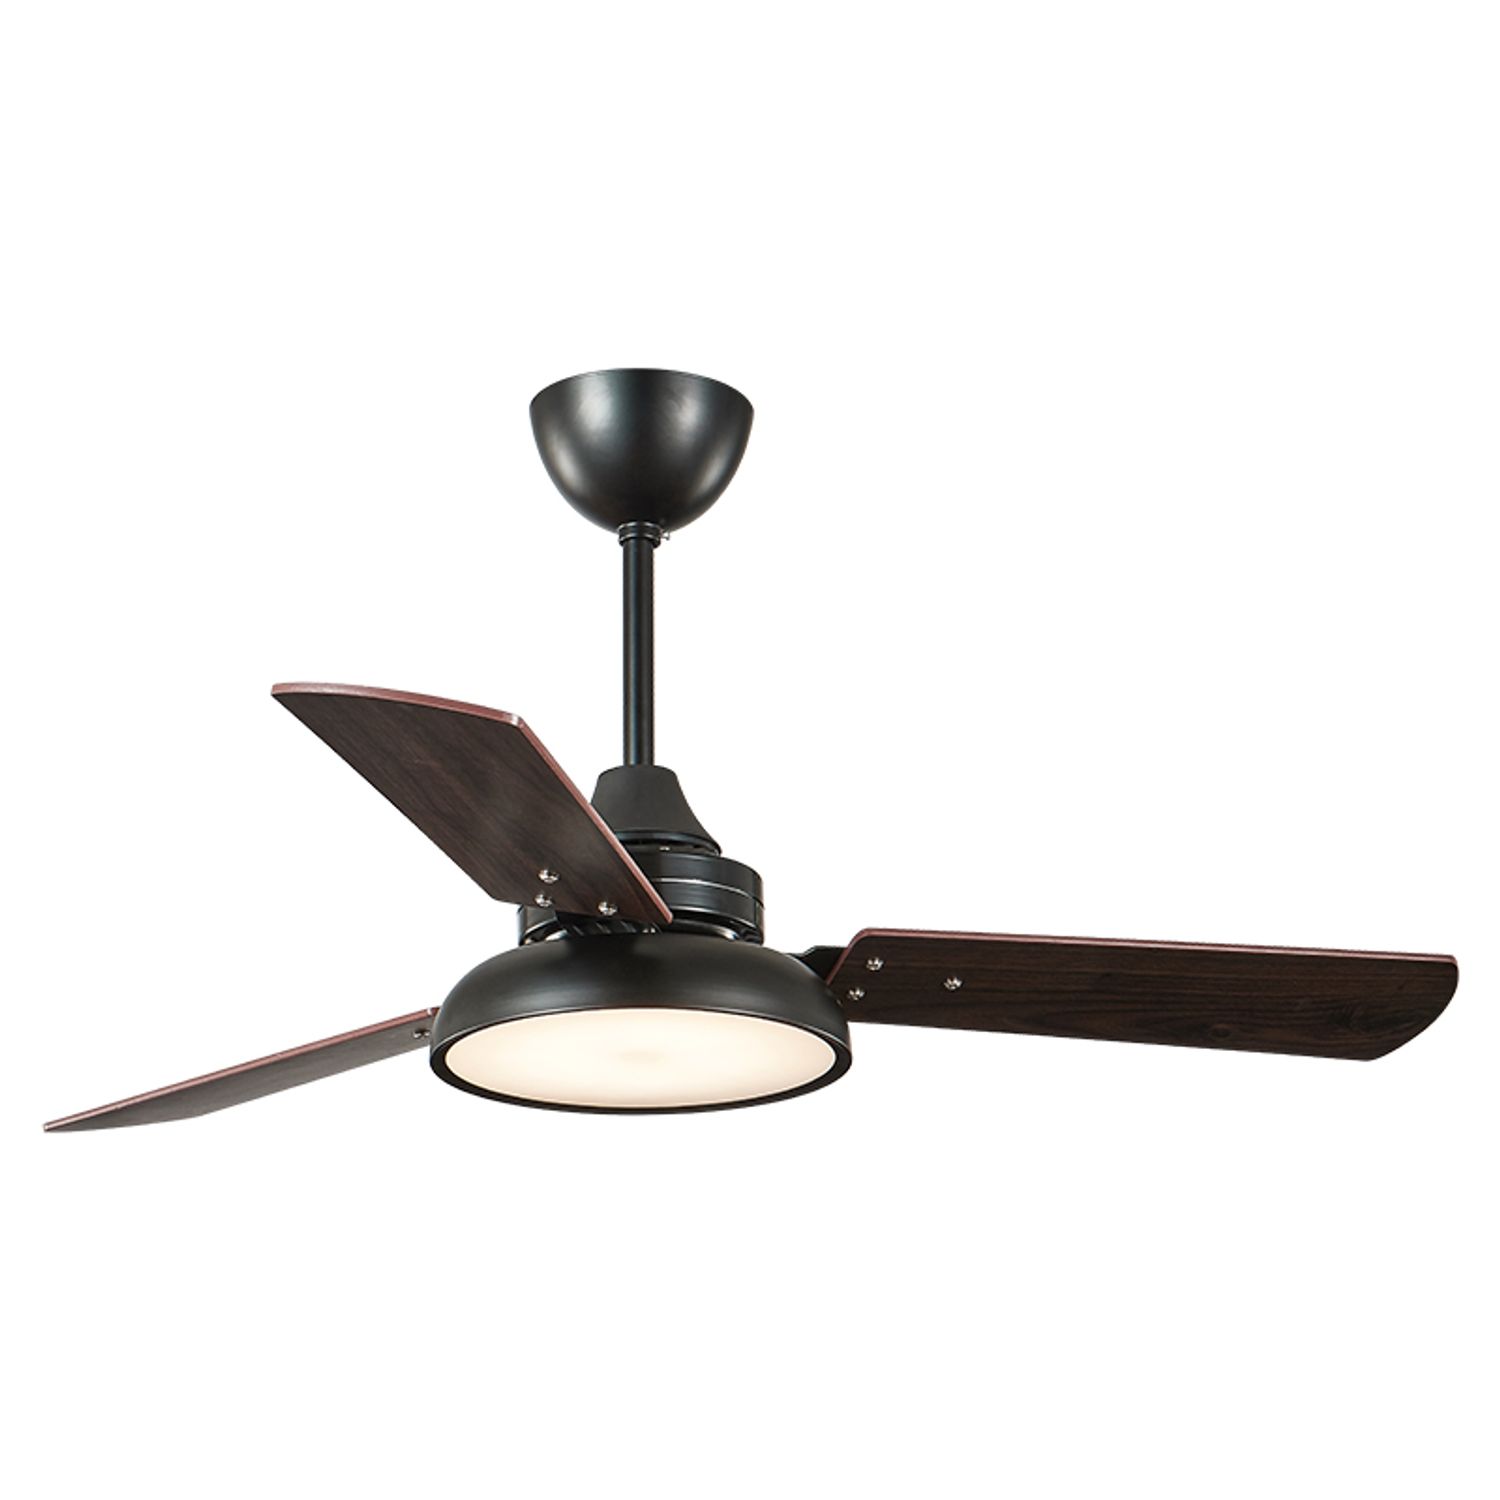 KBS 42" Black Contemporary 5 Speed Ceiling Fan with LED Light and Remote